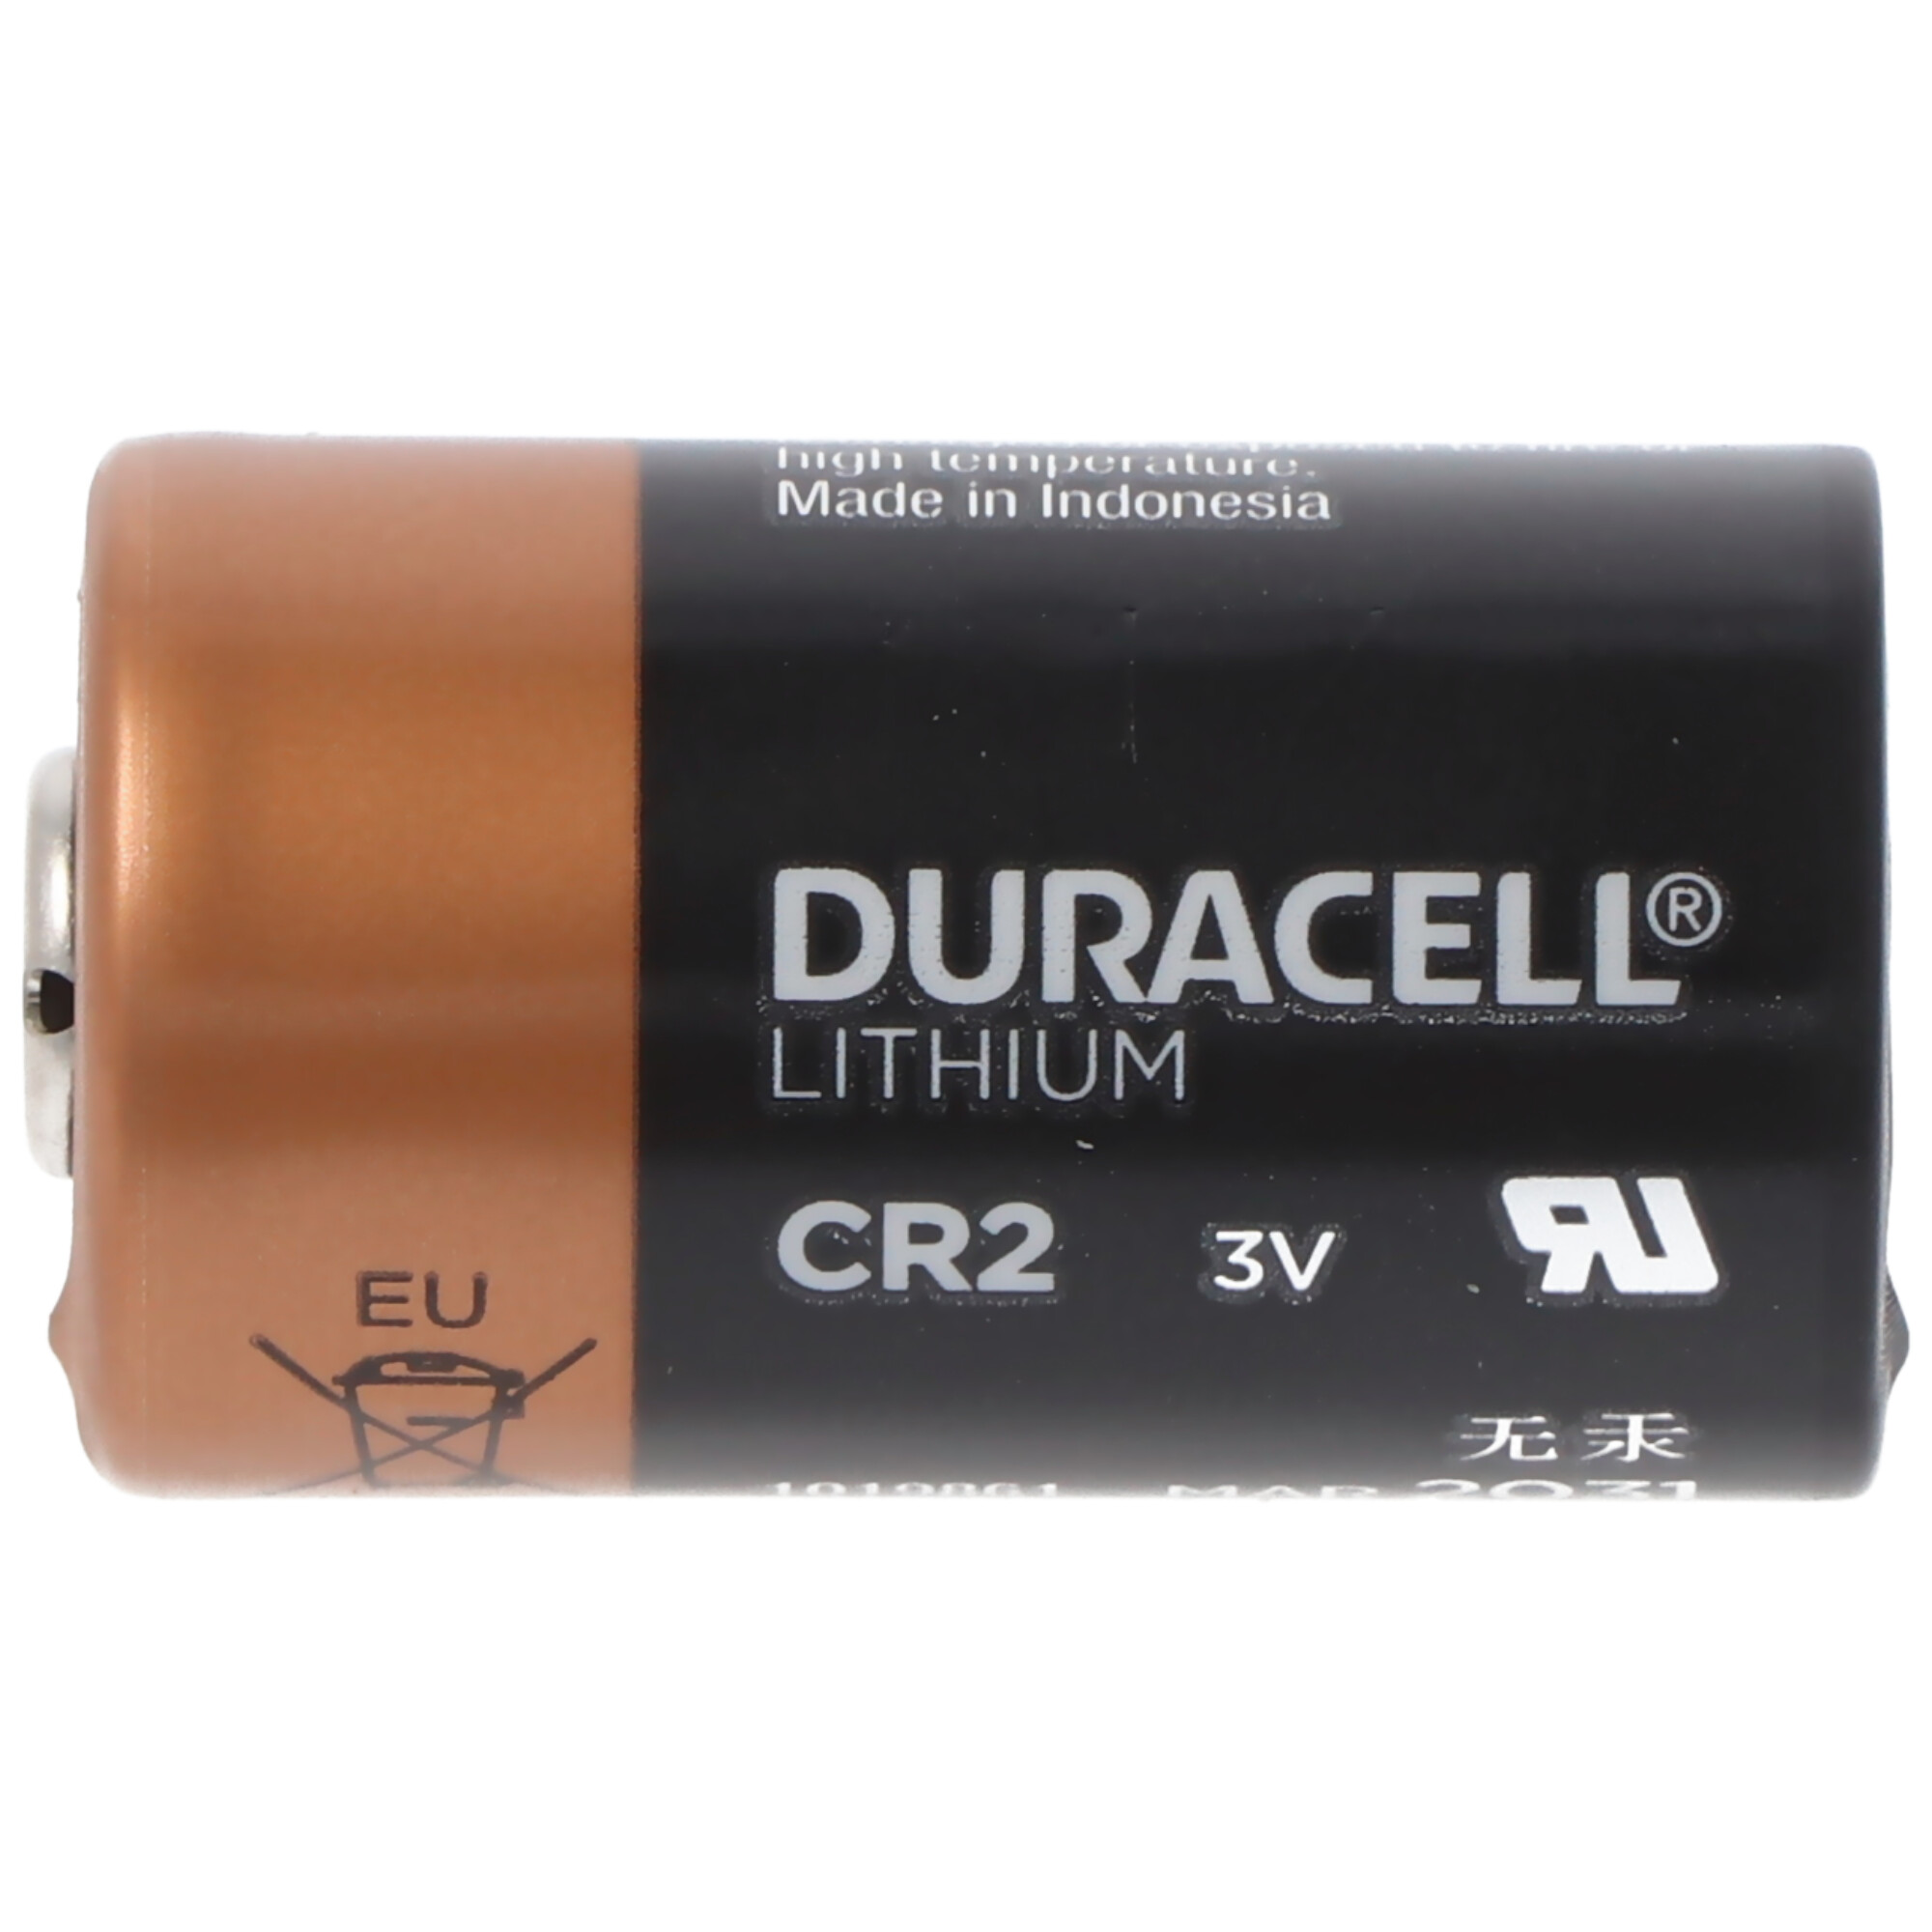 Duracell CR2 Ultra Lithium - Piles jetables